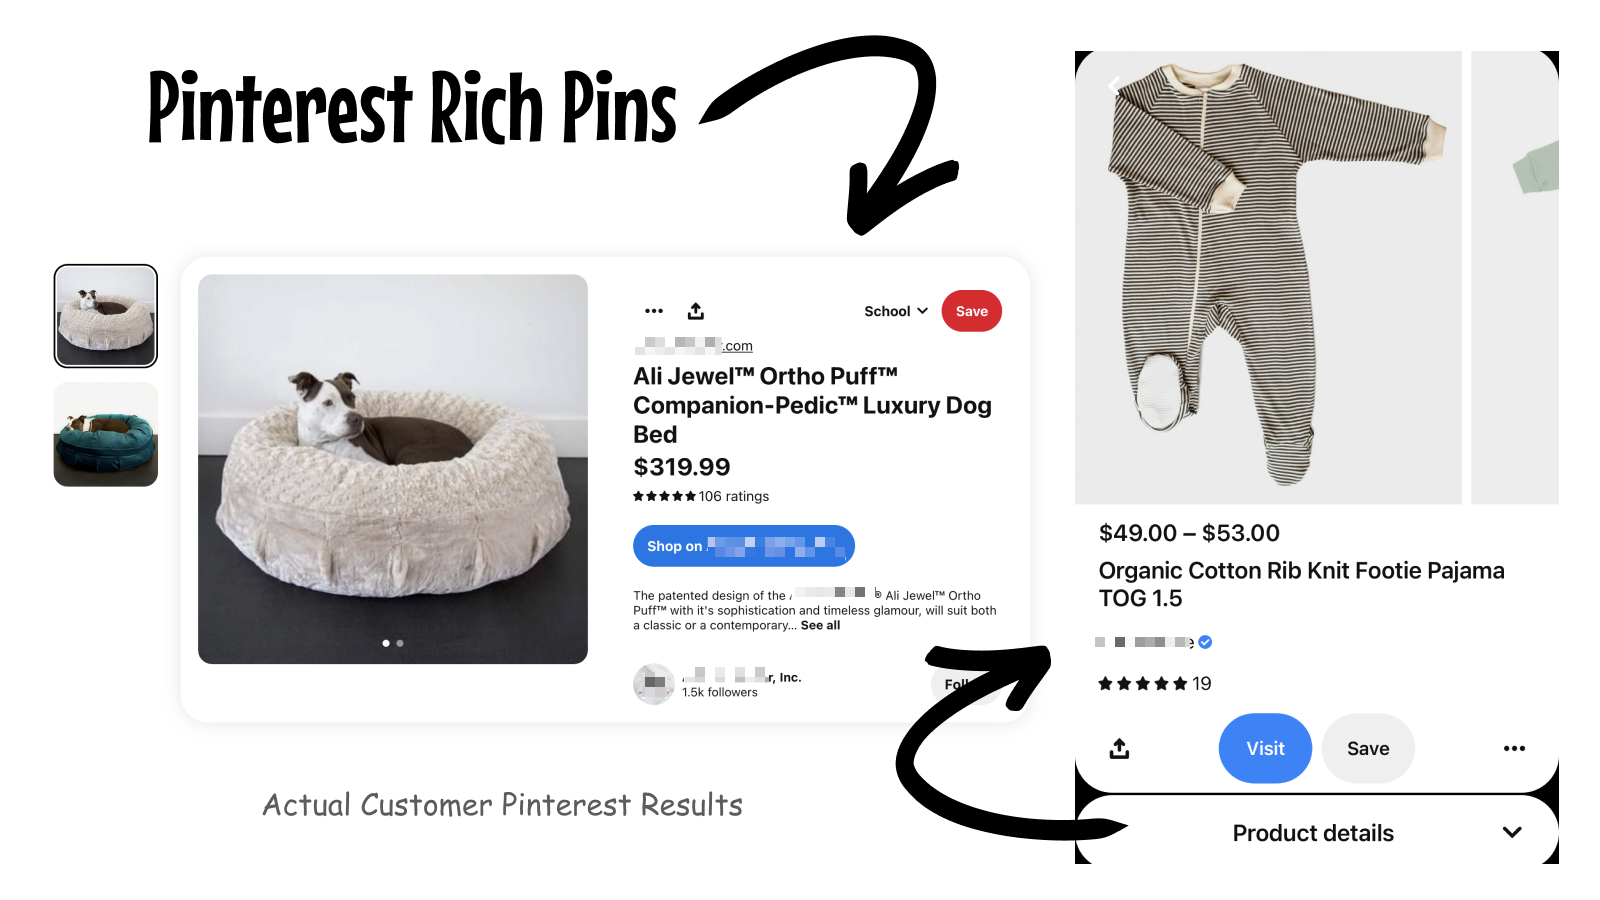 Example Pinterest Rich Pins for acual customers